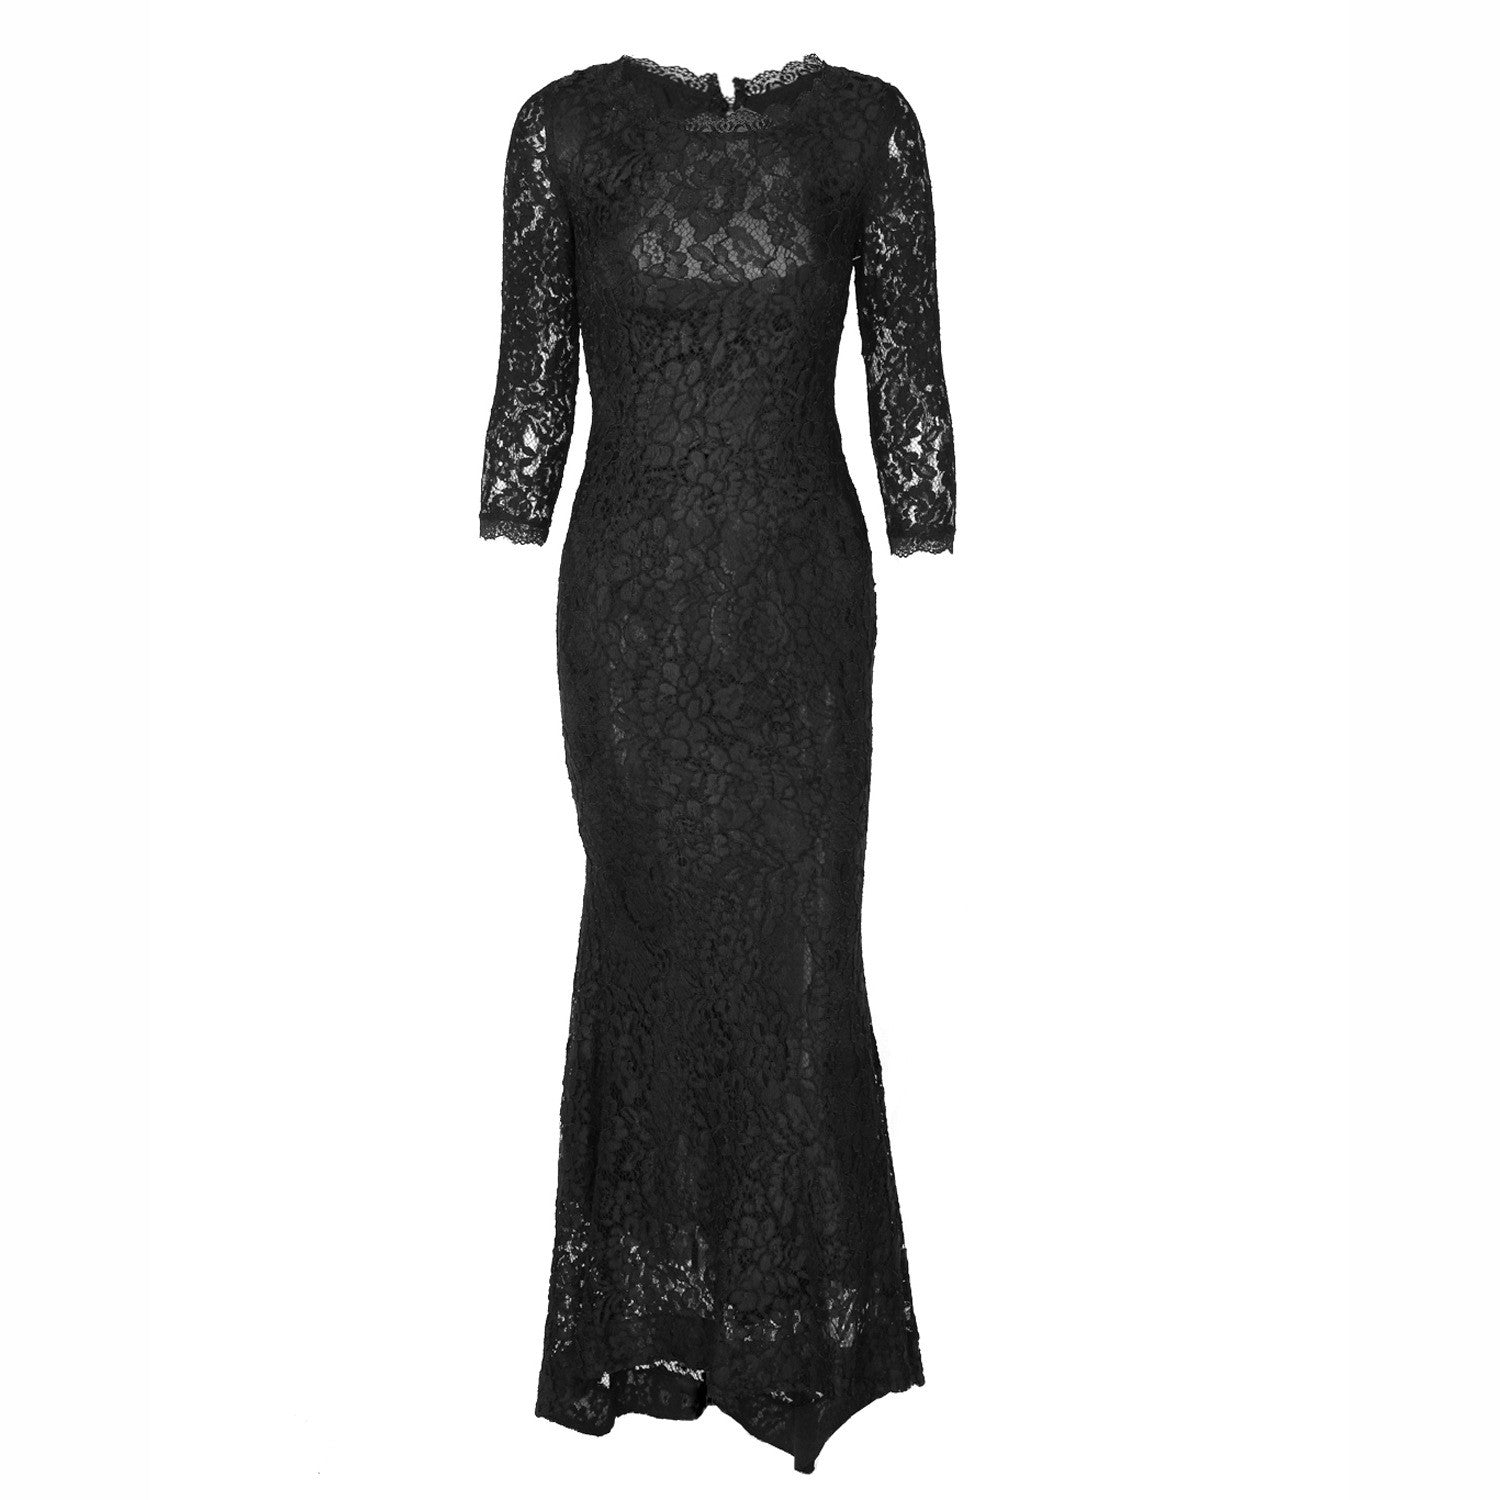 Sexy Black Lace Patchwork Bodycon Long Mermaid Dress - Oh Yours Fashion - 6